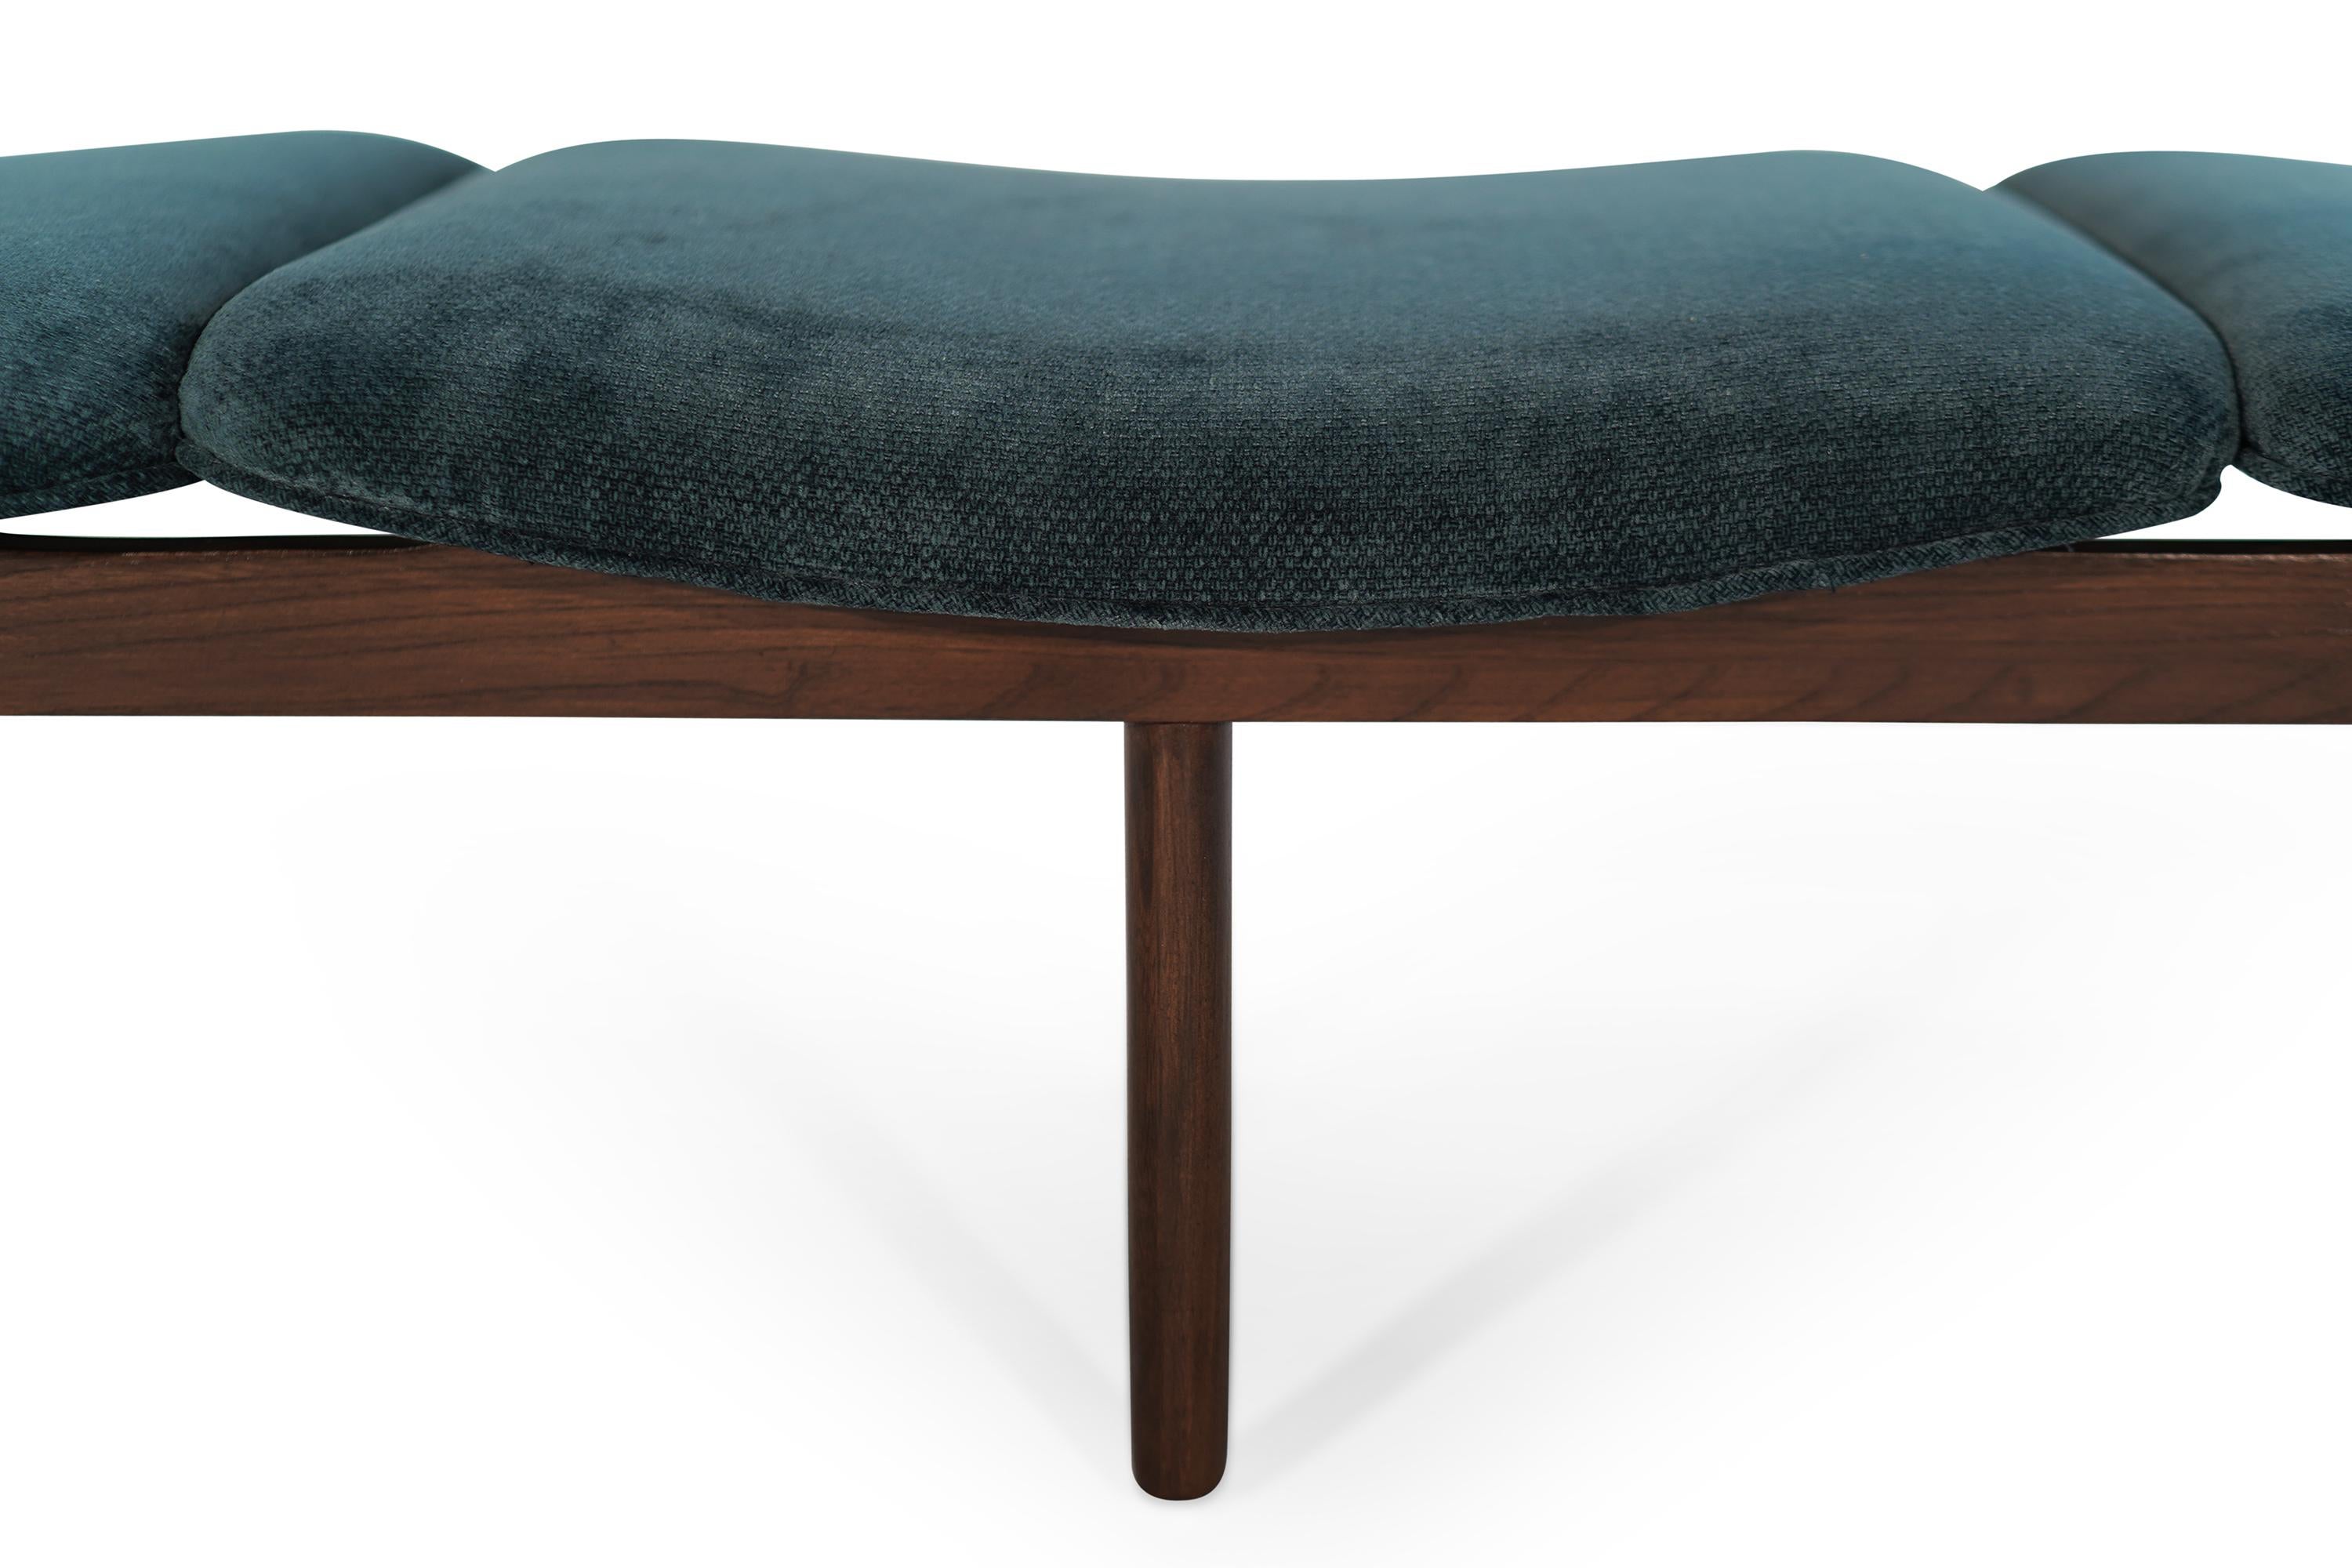 Lawrence Peabody Bench in Teal Twill, 1950s 3